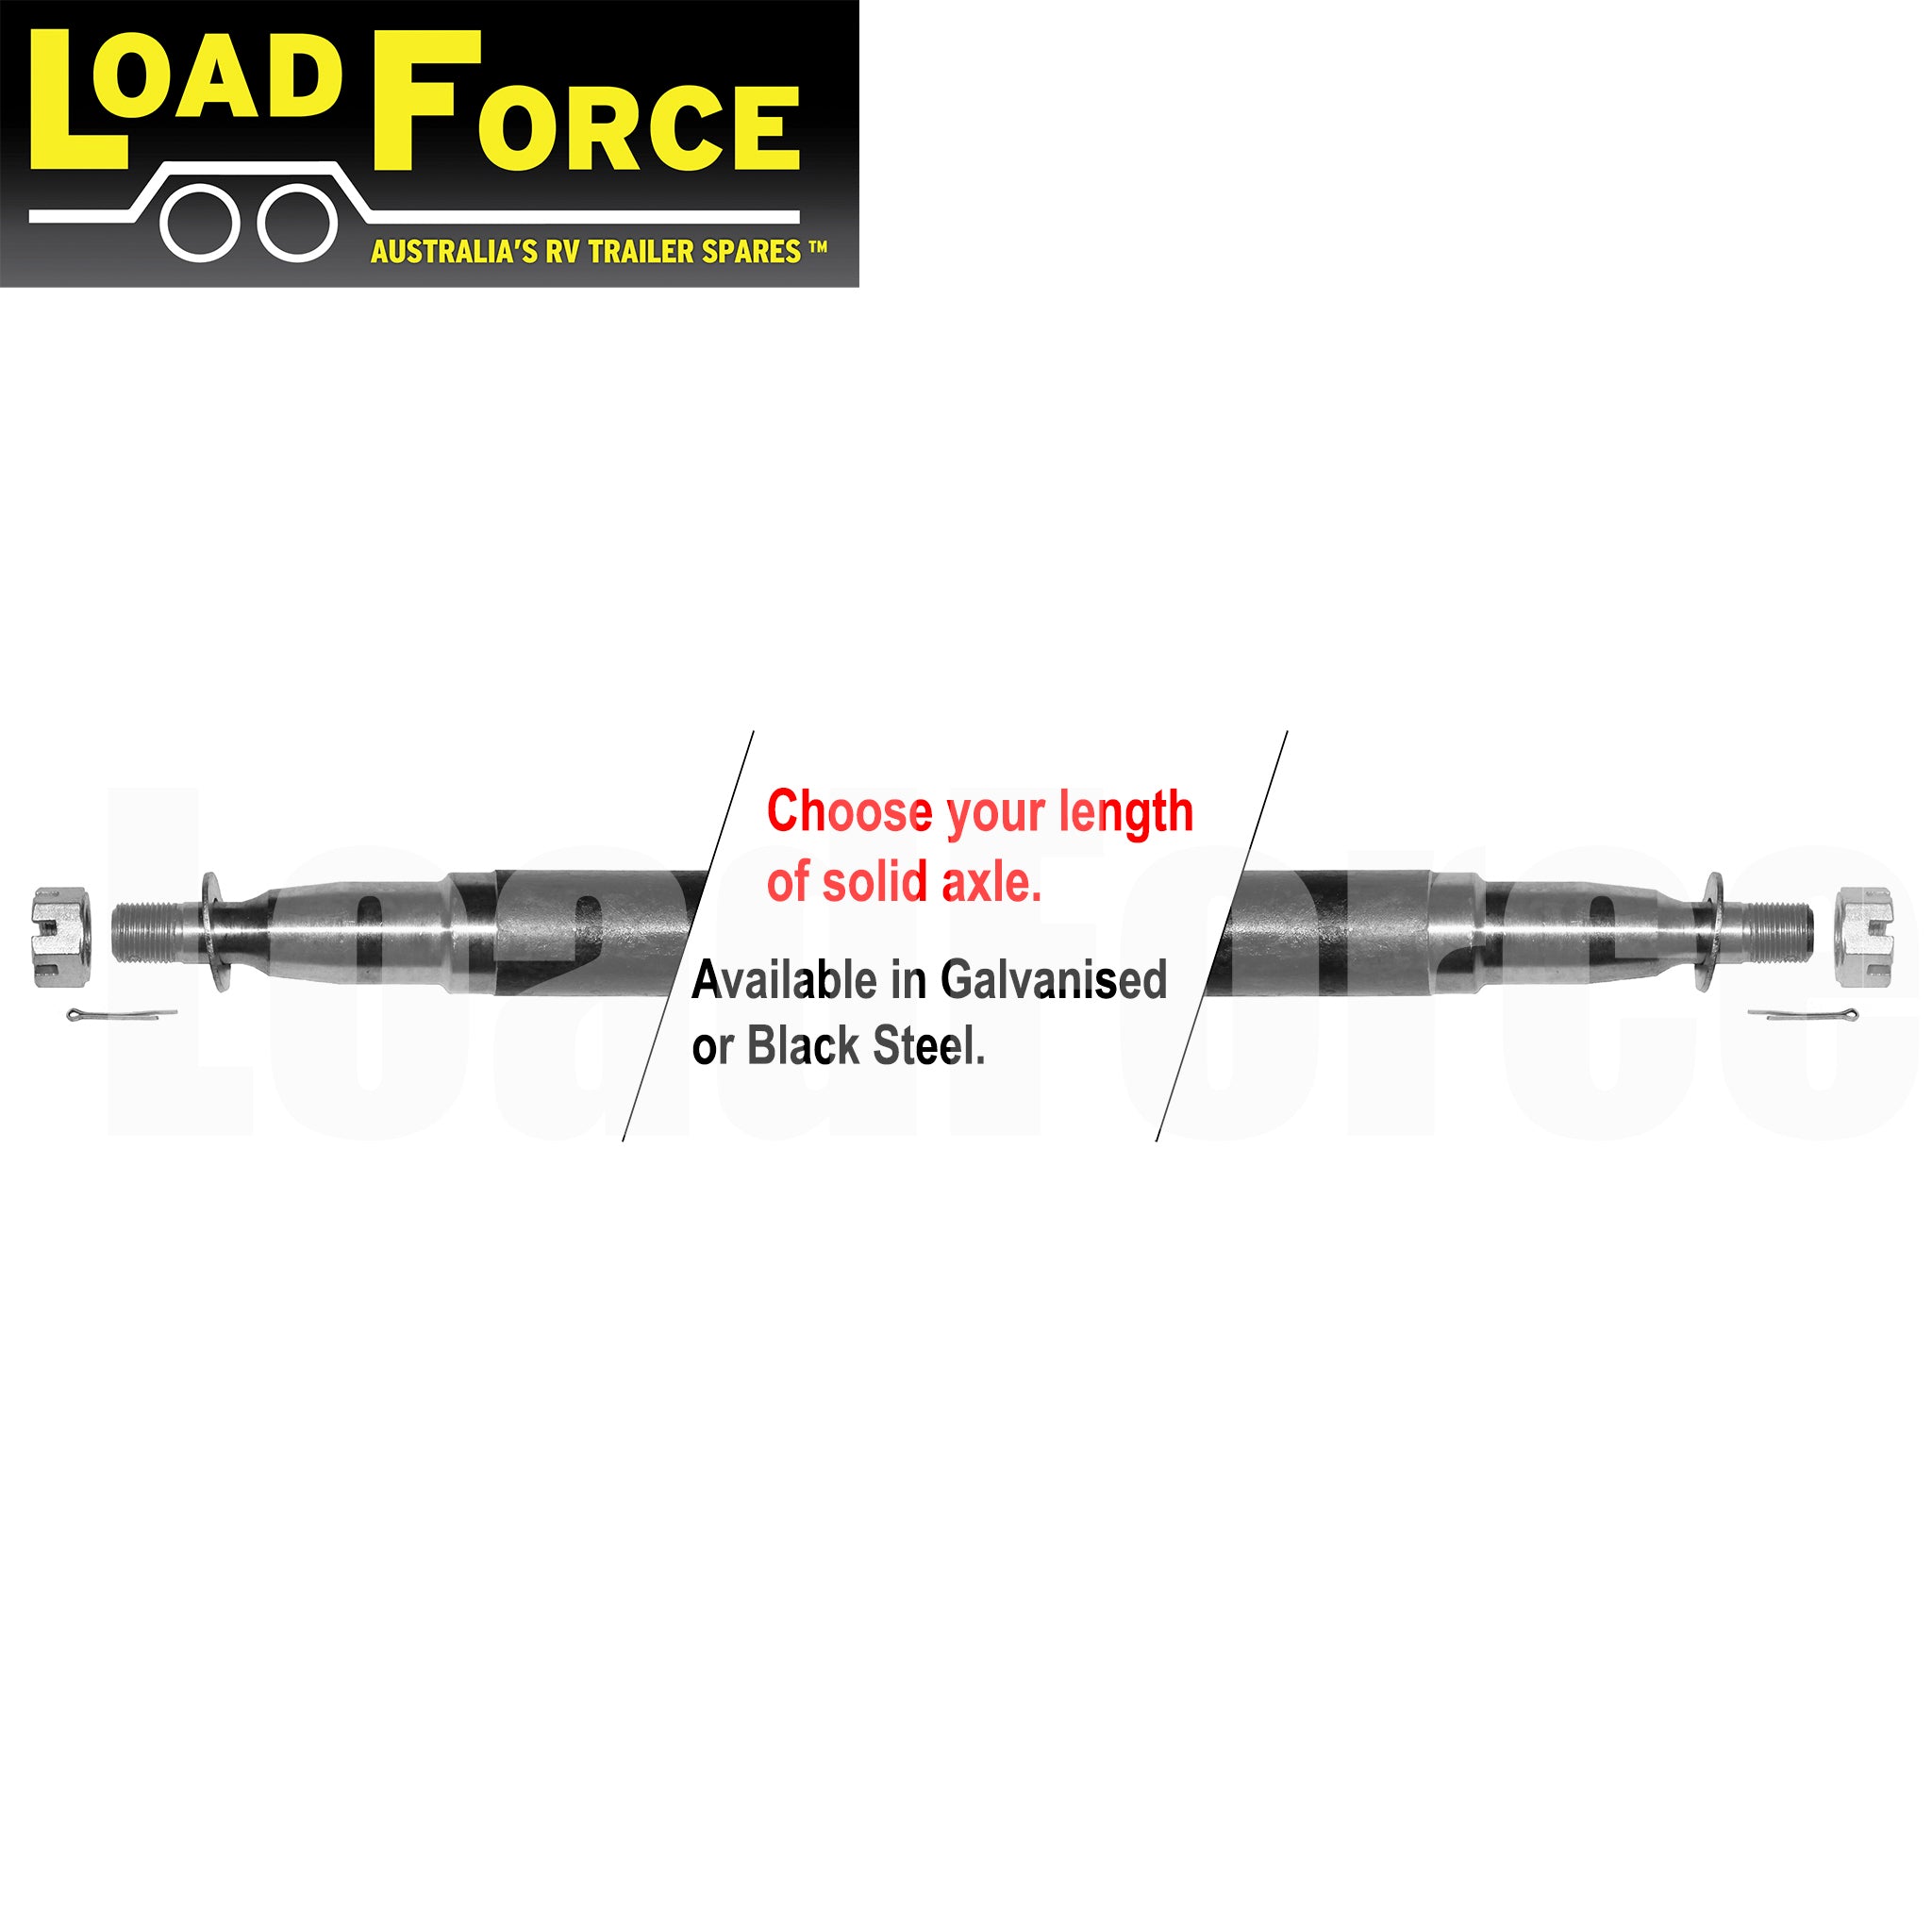 LoadForce Axle 39mm round LM bearing turn 1000kg rating - choose length and finish